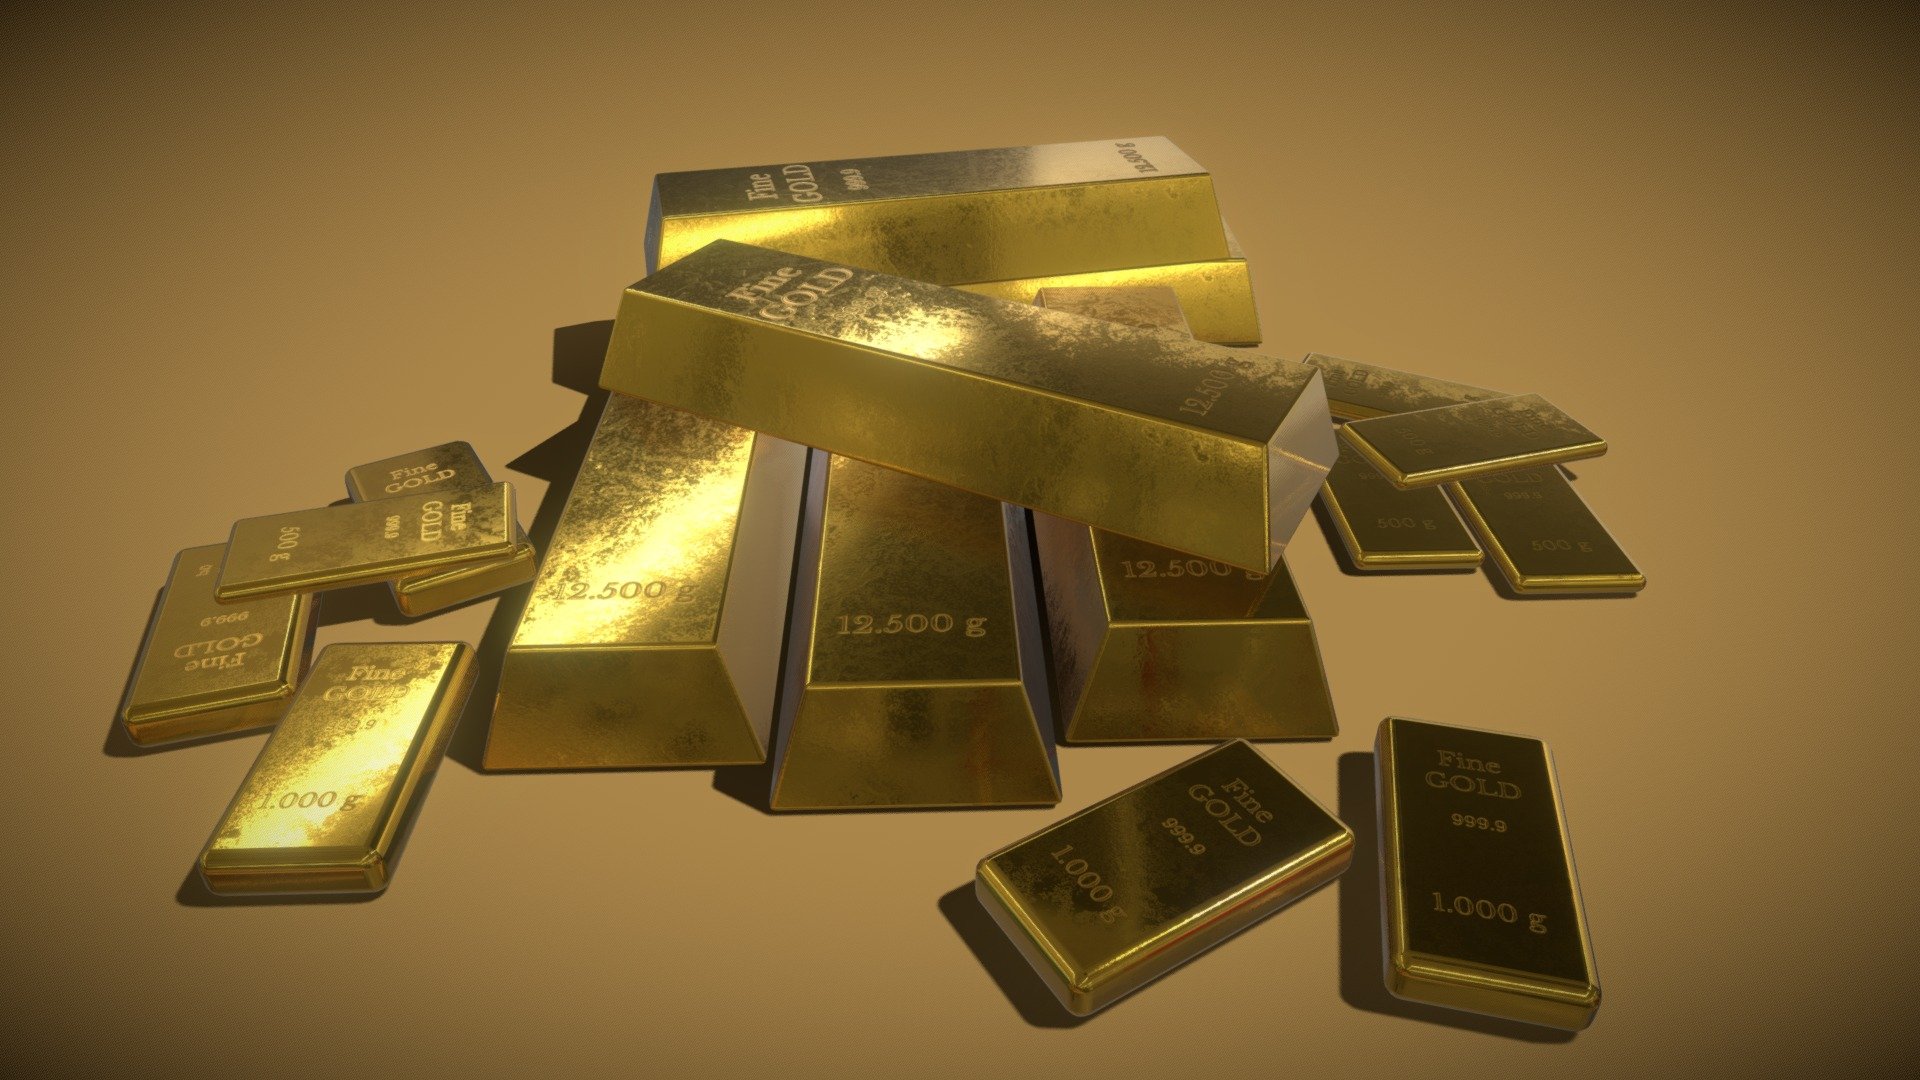 This is a bunch of gold, the kind that every bank robber dreams of. Don't let the dragon sickness get to you!

These low poly gold bars consist of three weight types: 12,5kg, 1kg and 500g. All of them are accurate to real life gold bar sizes.
Enjoy! - Gold bars - 3D model by Glimmer (@Glimmerstone) 3d model